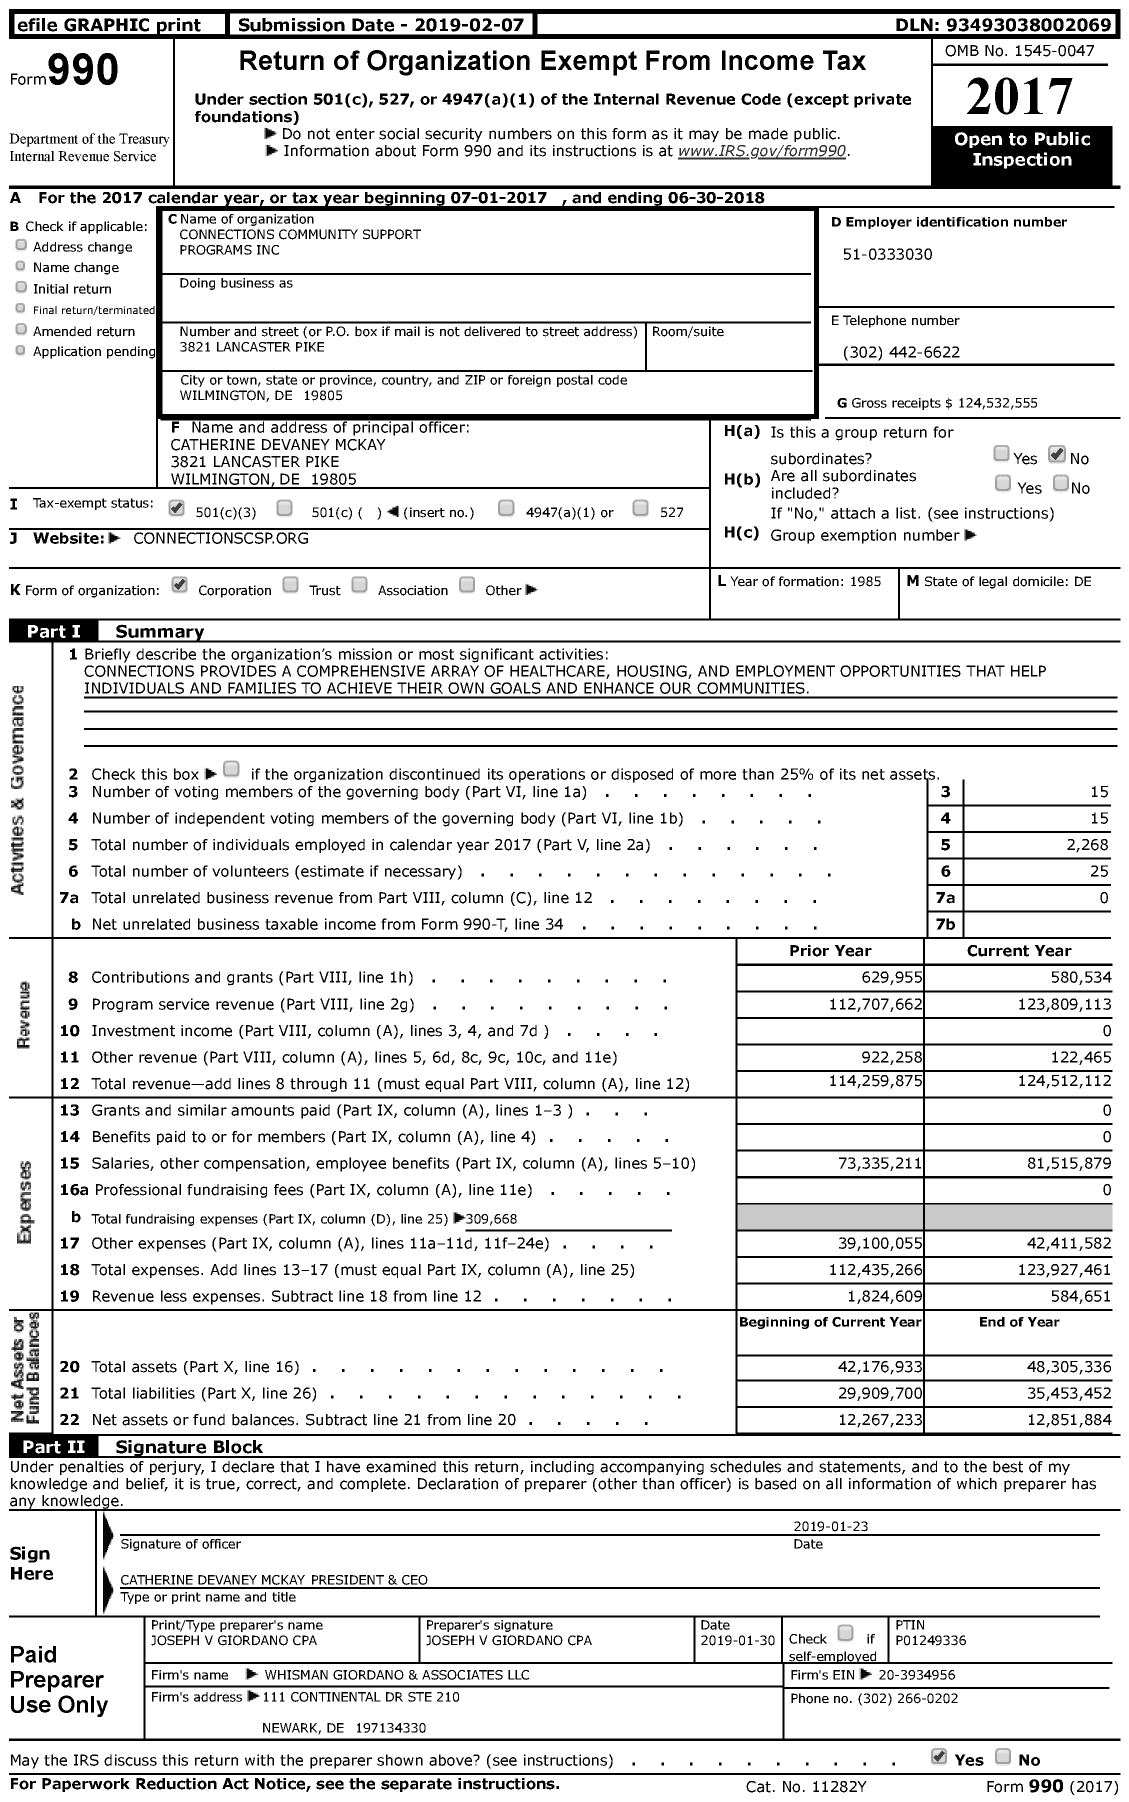 Image of first page of 2017 Form 990 for Connections Community Support Programs